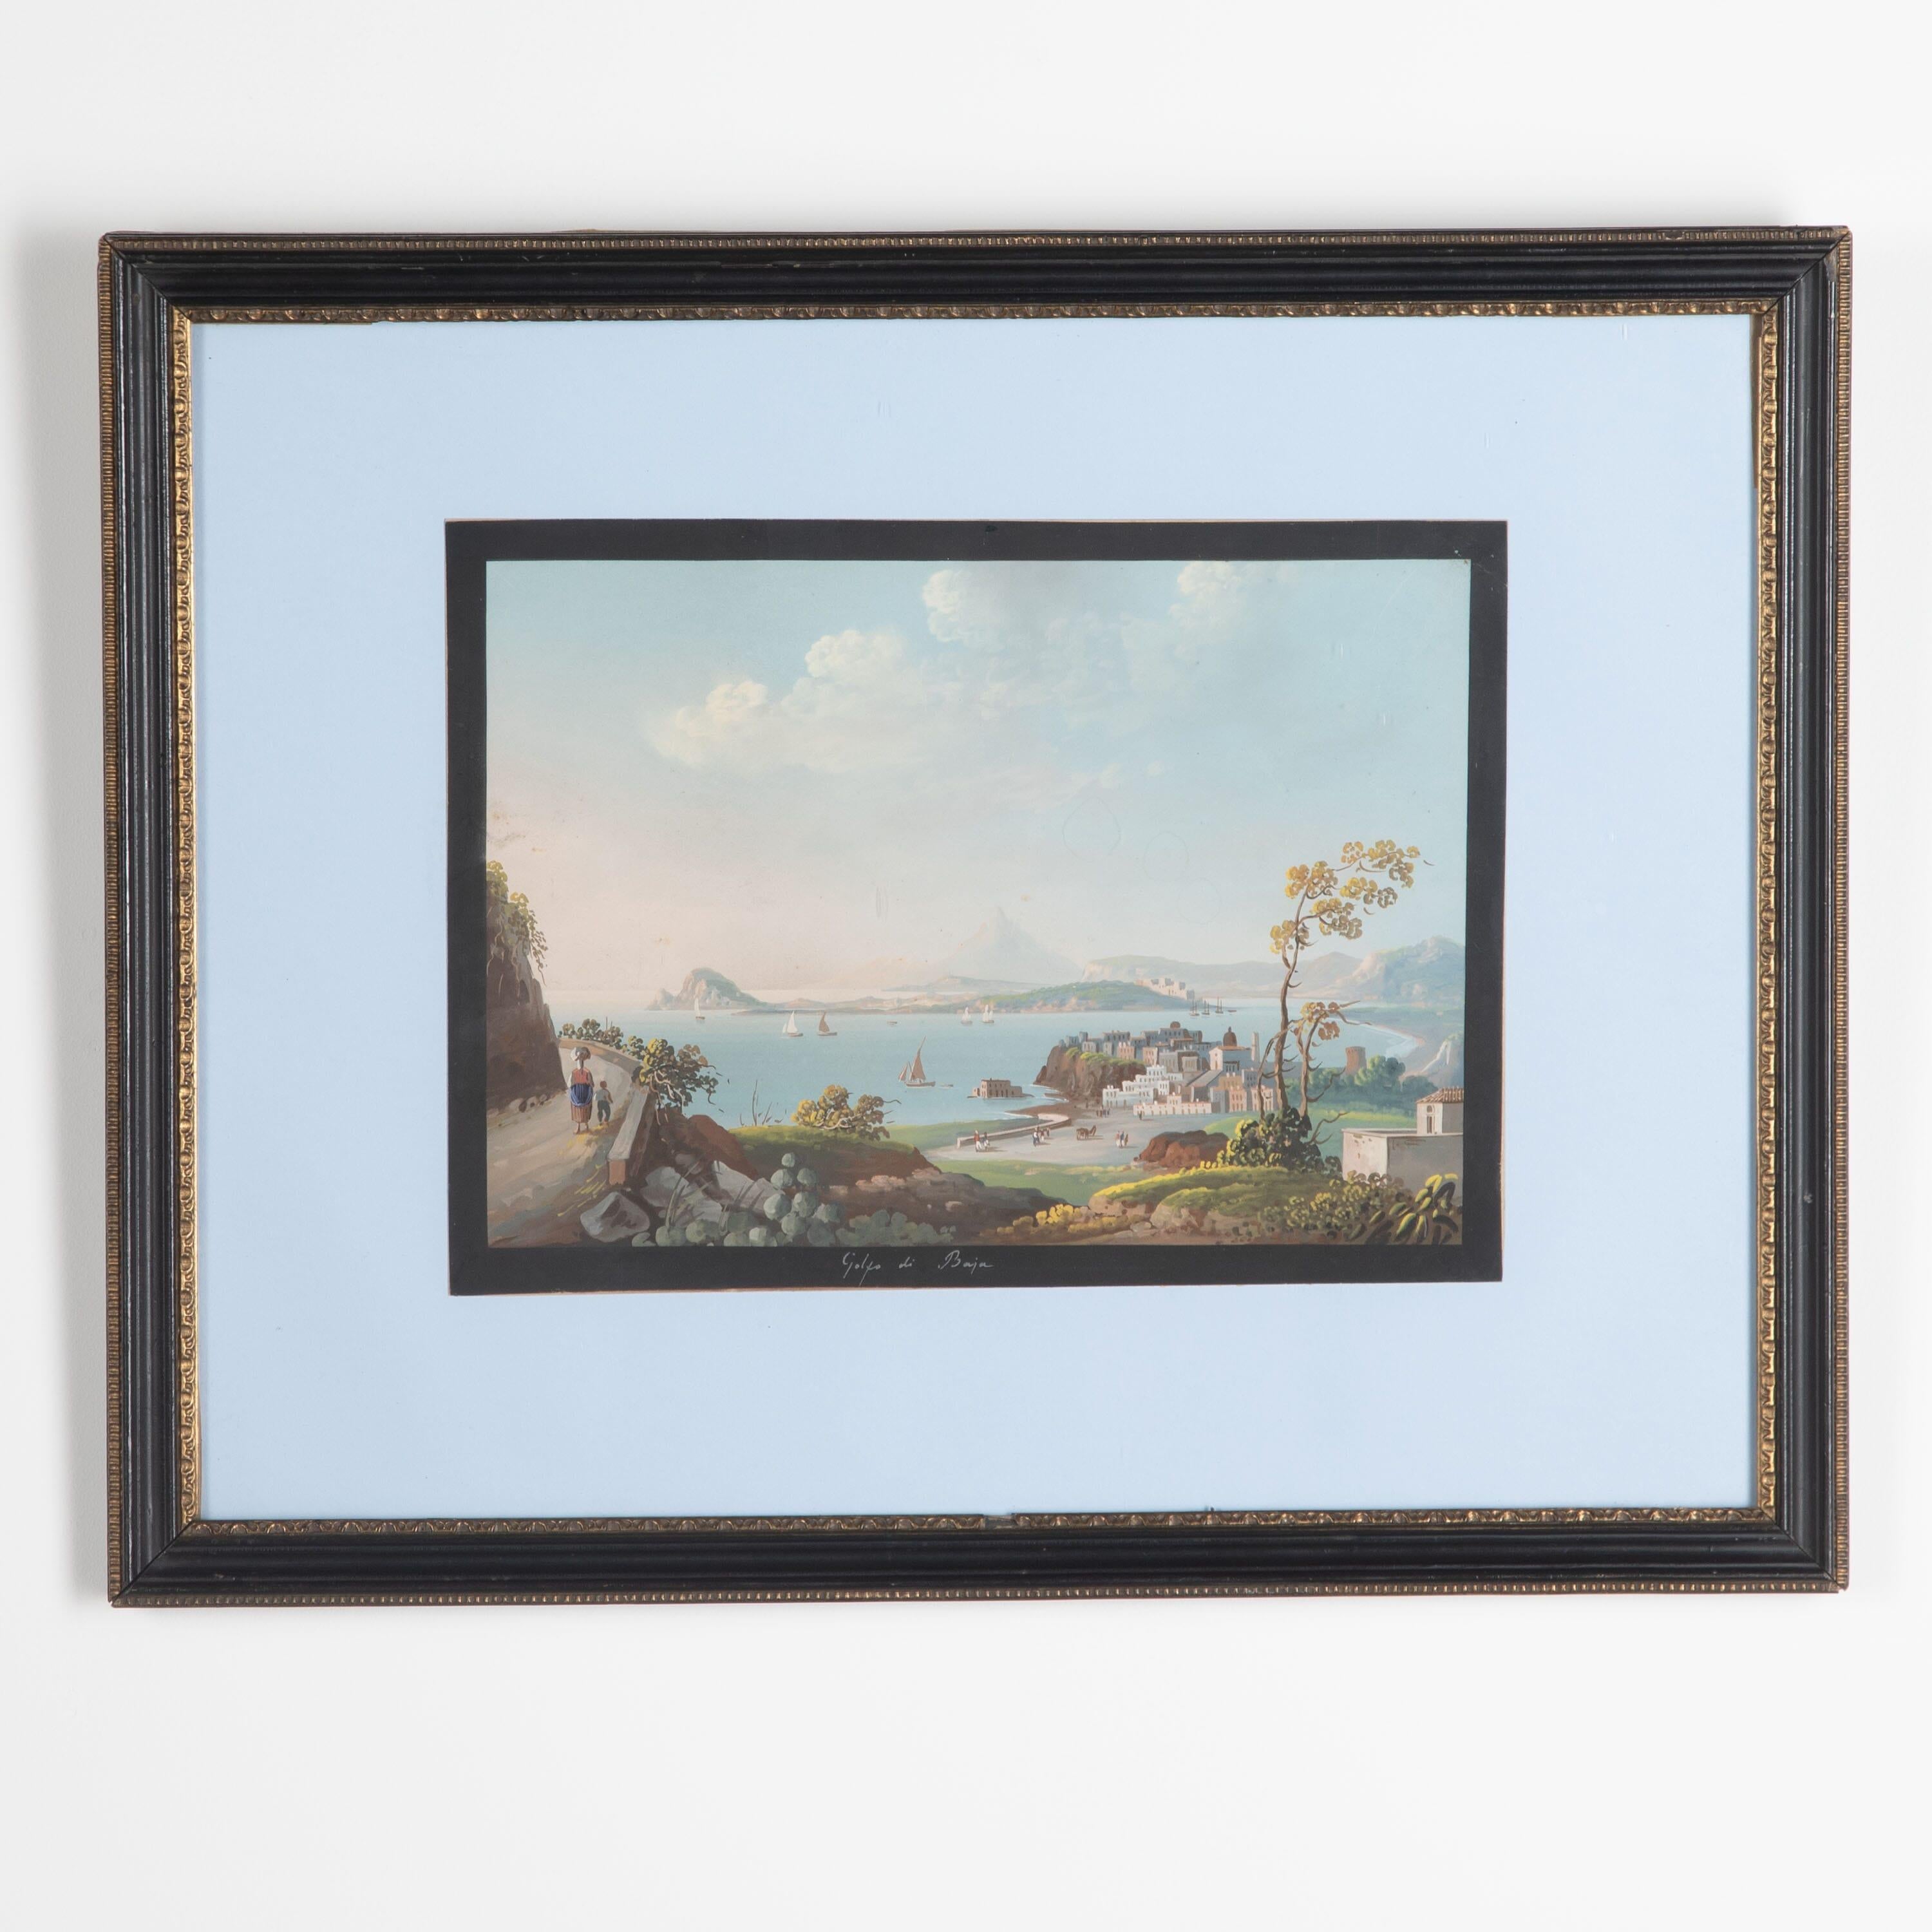  A rare set of 4 exquisitely executed gouaches of Naples and surrounding area, showing unusual scenes of the bays of Amalfi, Sorrento, the golf of Baja (Sardinia) and Tempi Di Pesti in Salerno (Campania). Each with finely detailed scenes of